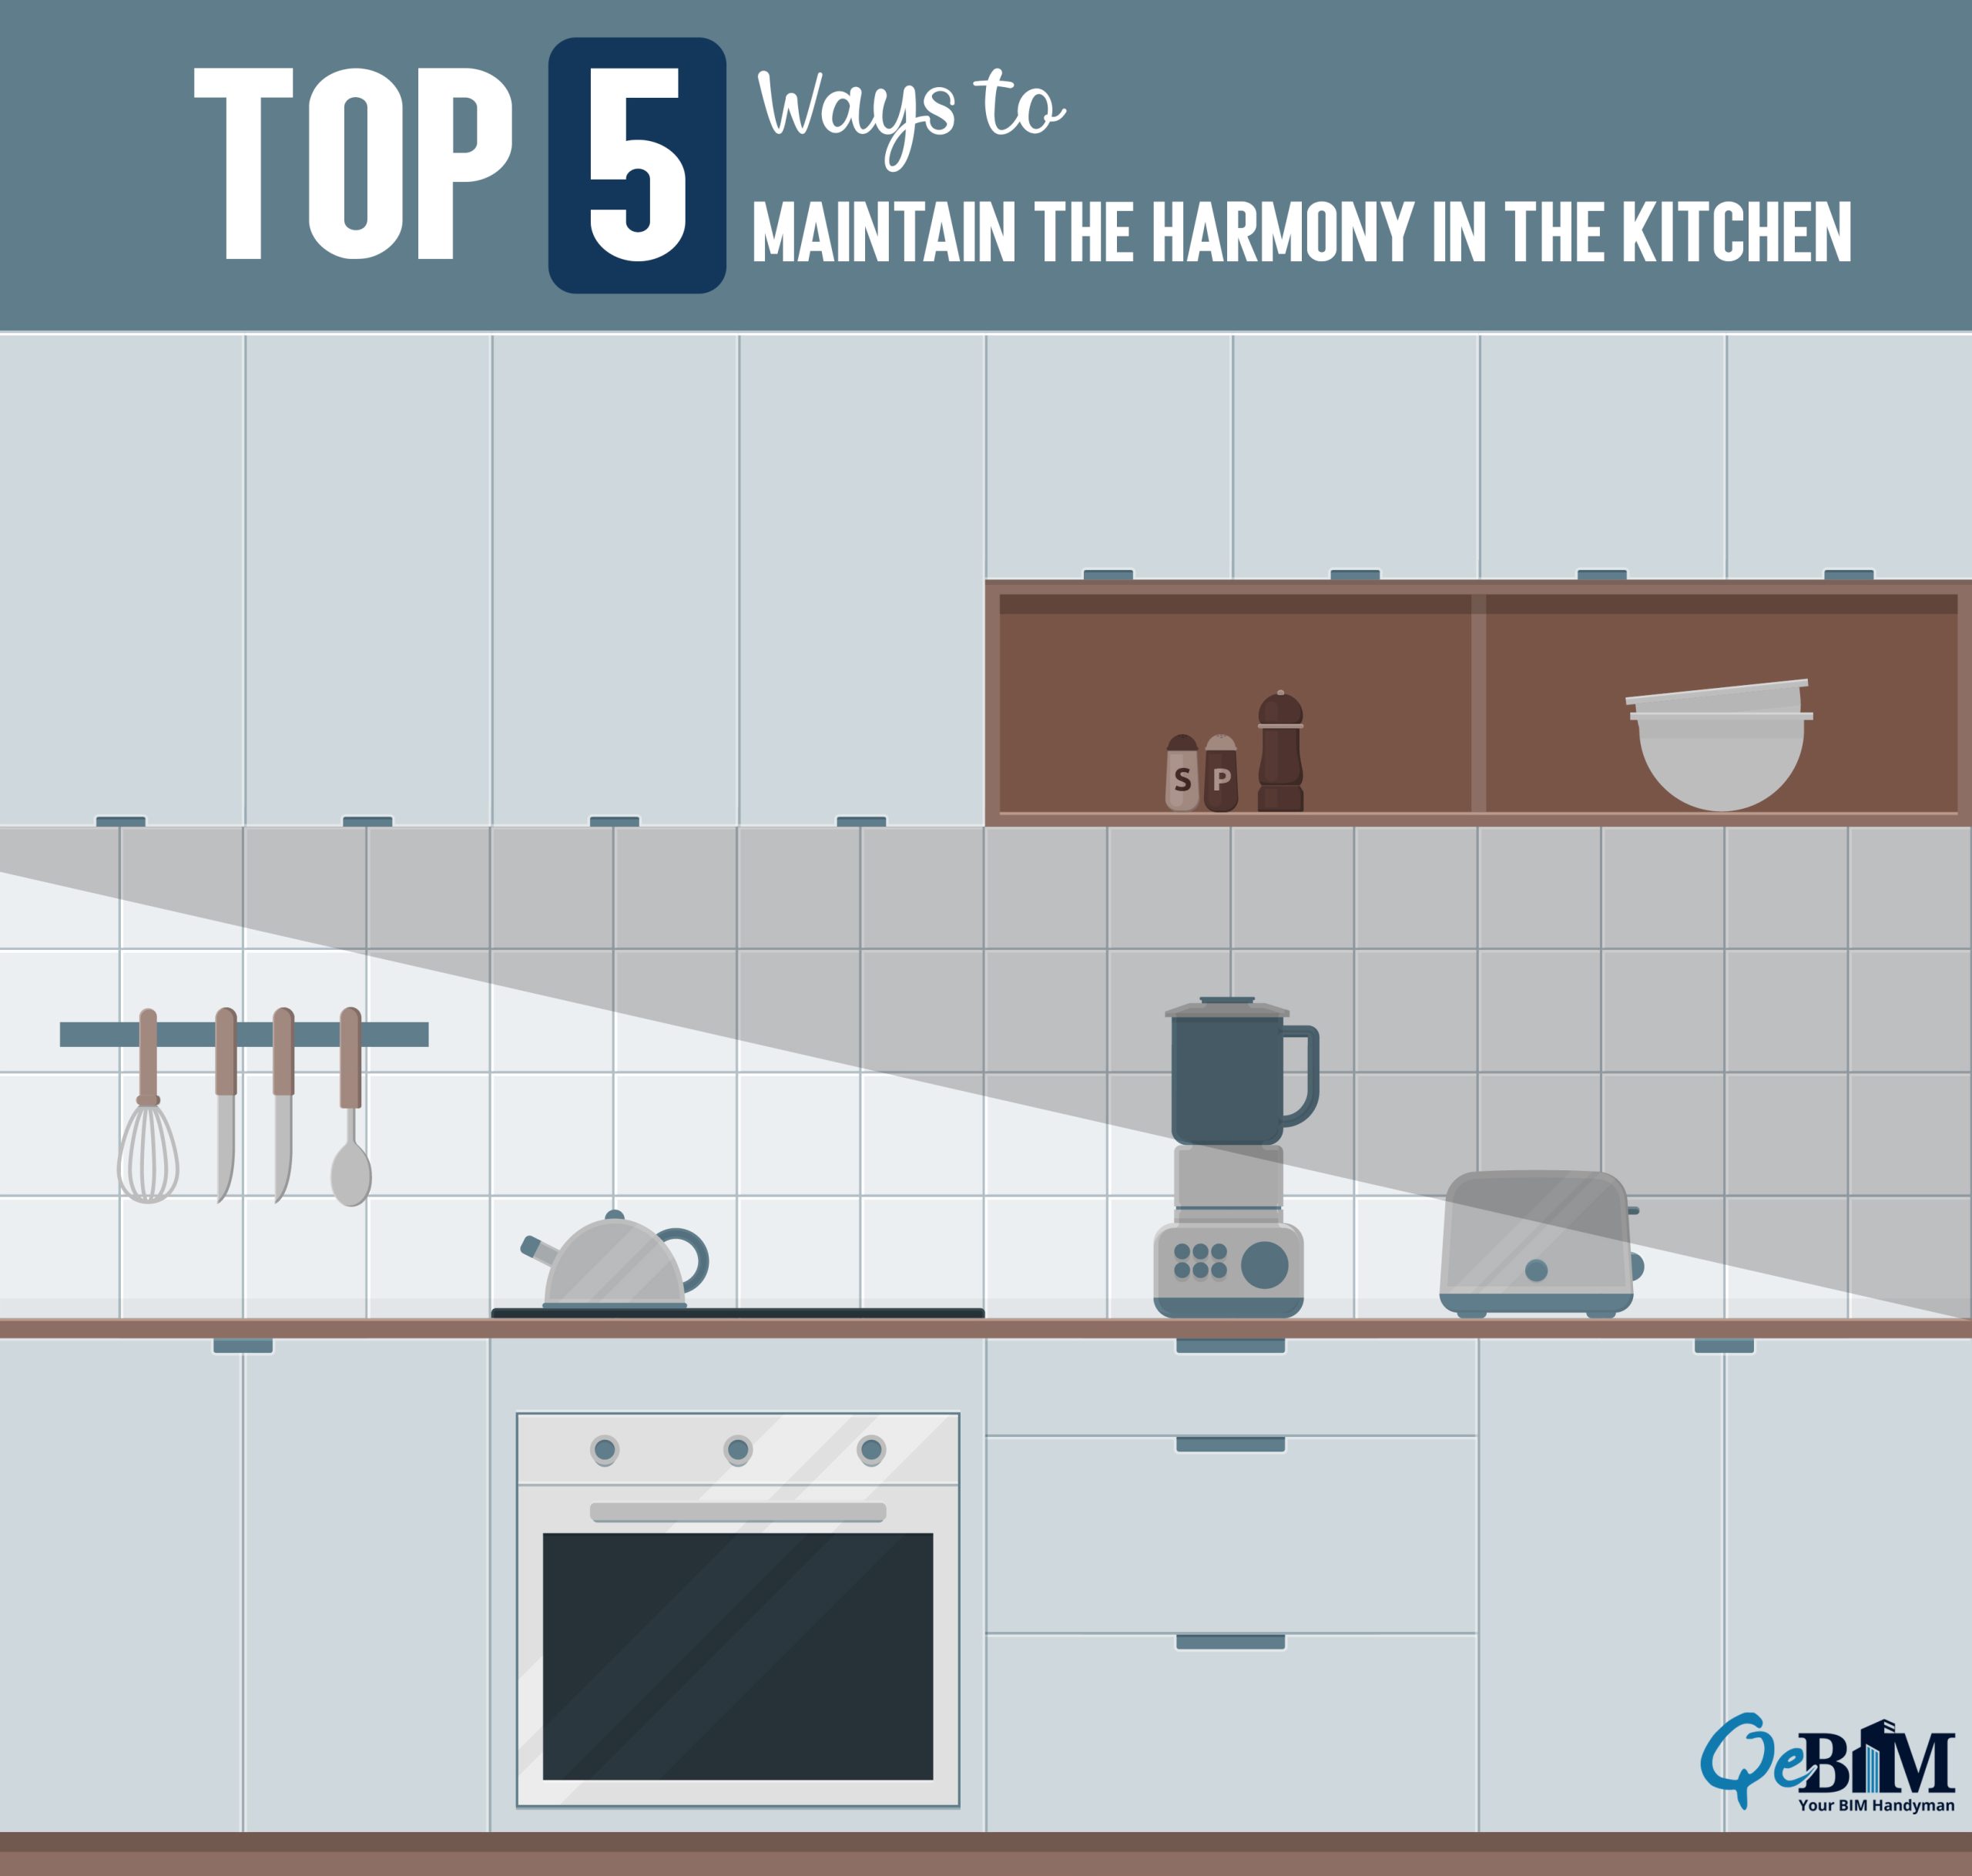 Top 5 Ways to Maintain the Harmony in The Kitchen?